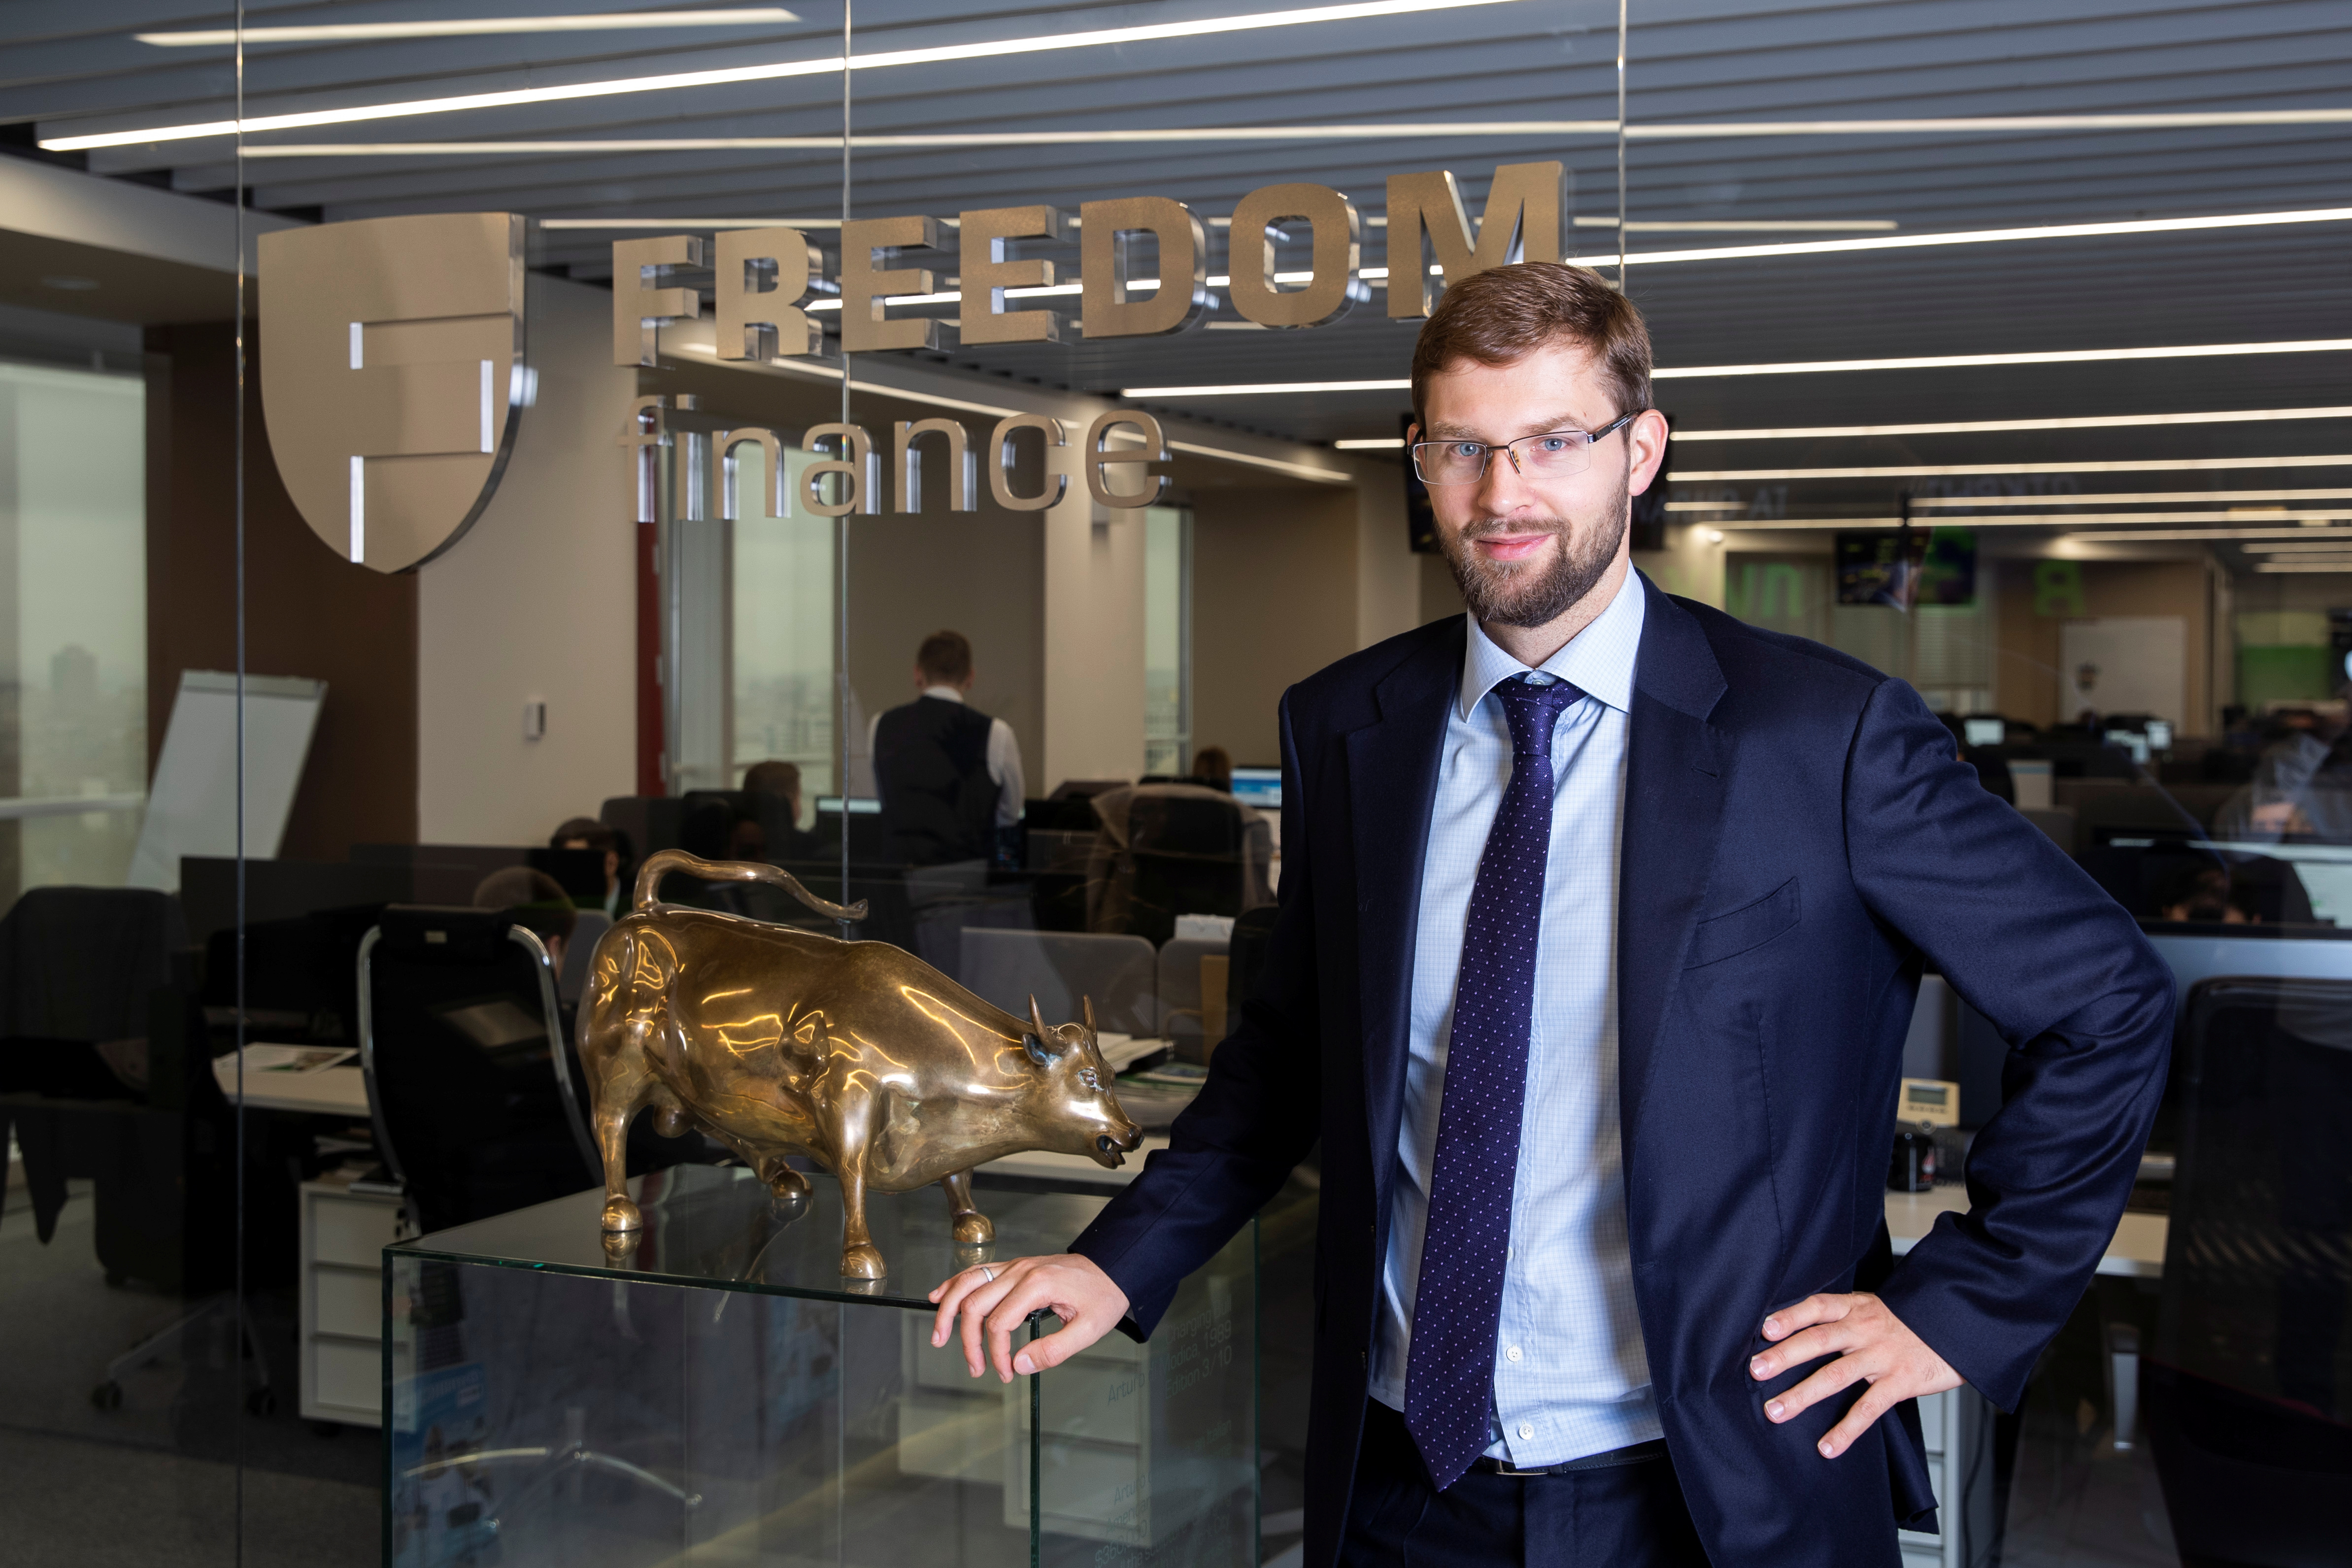 Timur Turlov, CEO of Freedom Finance brokerage poses for a portrait after the interview in the office in Moscow